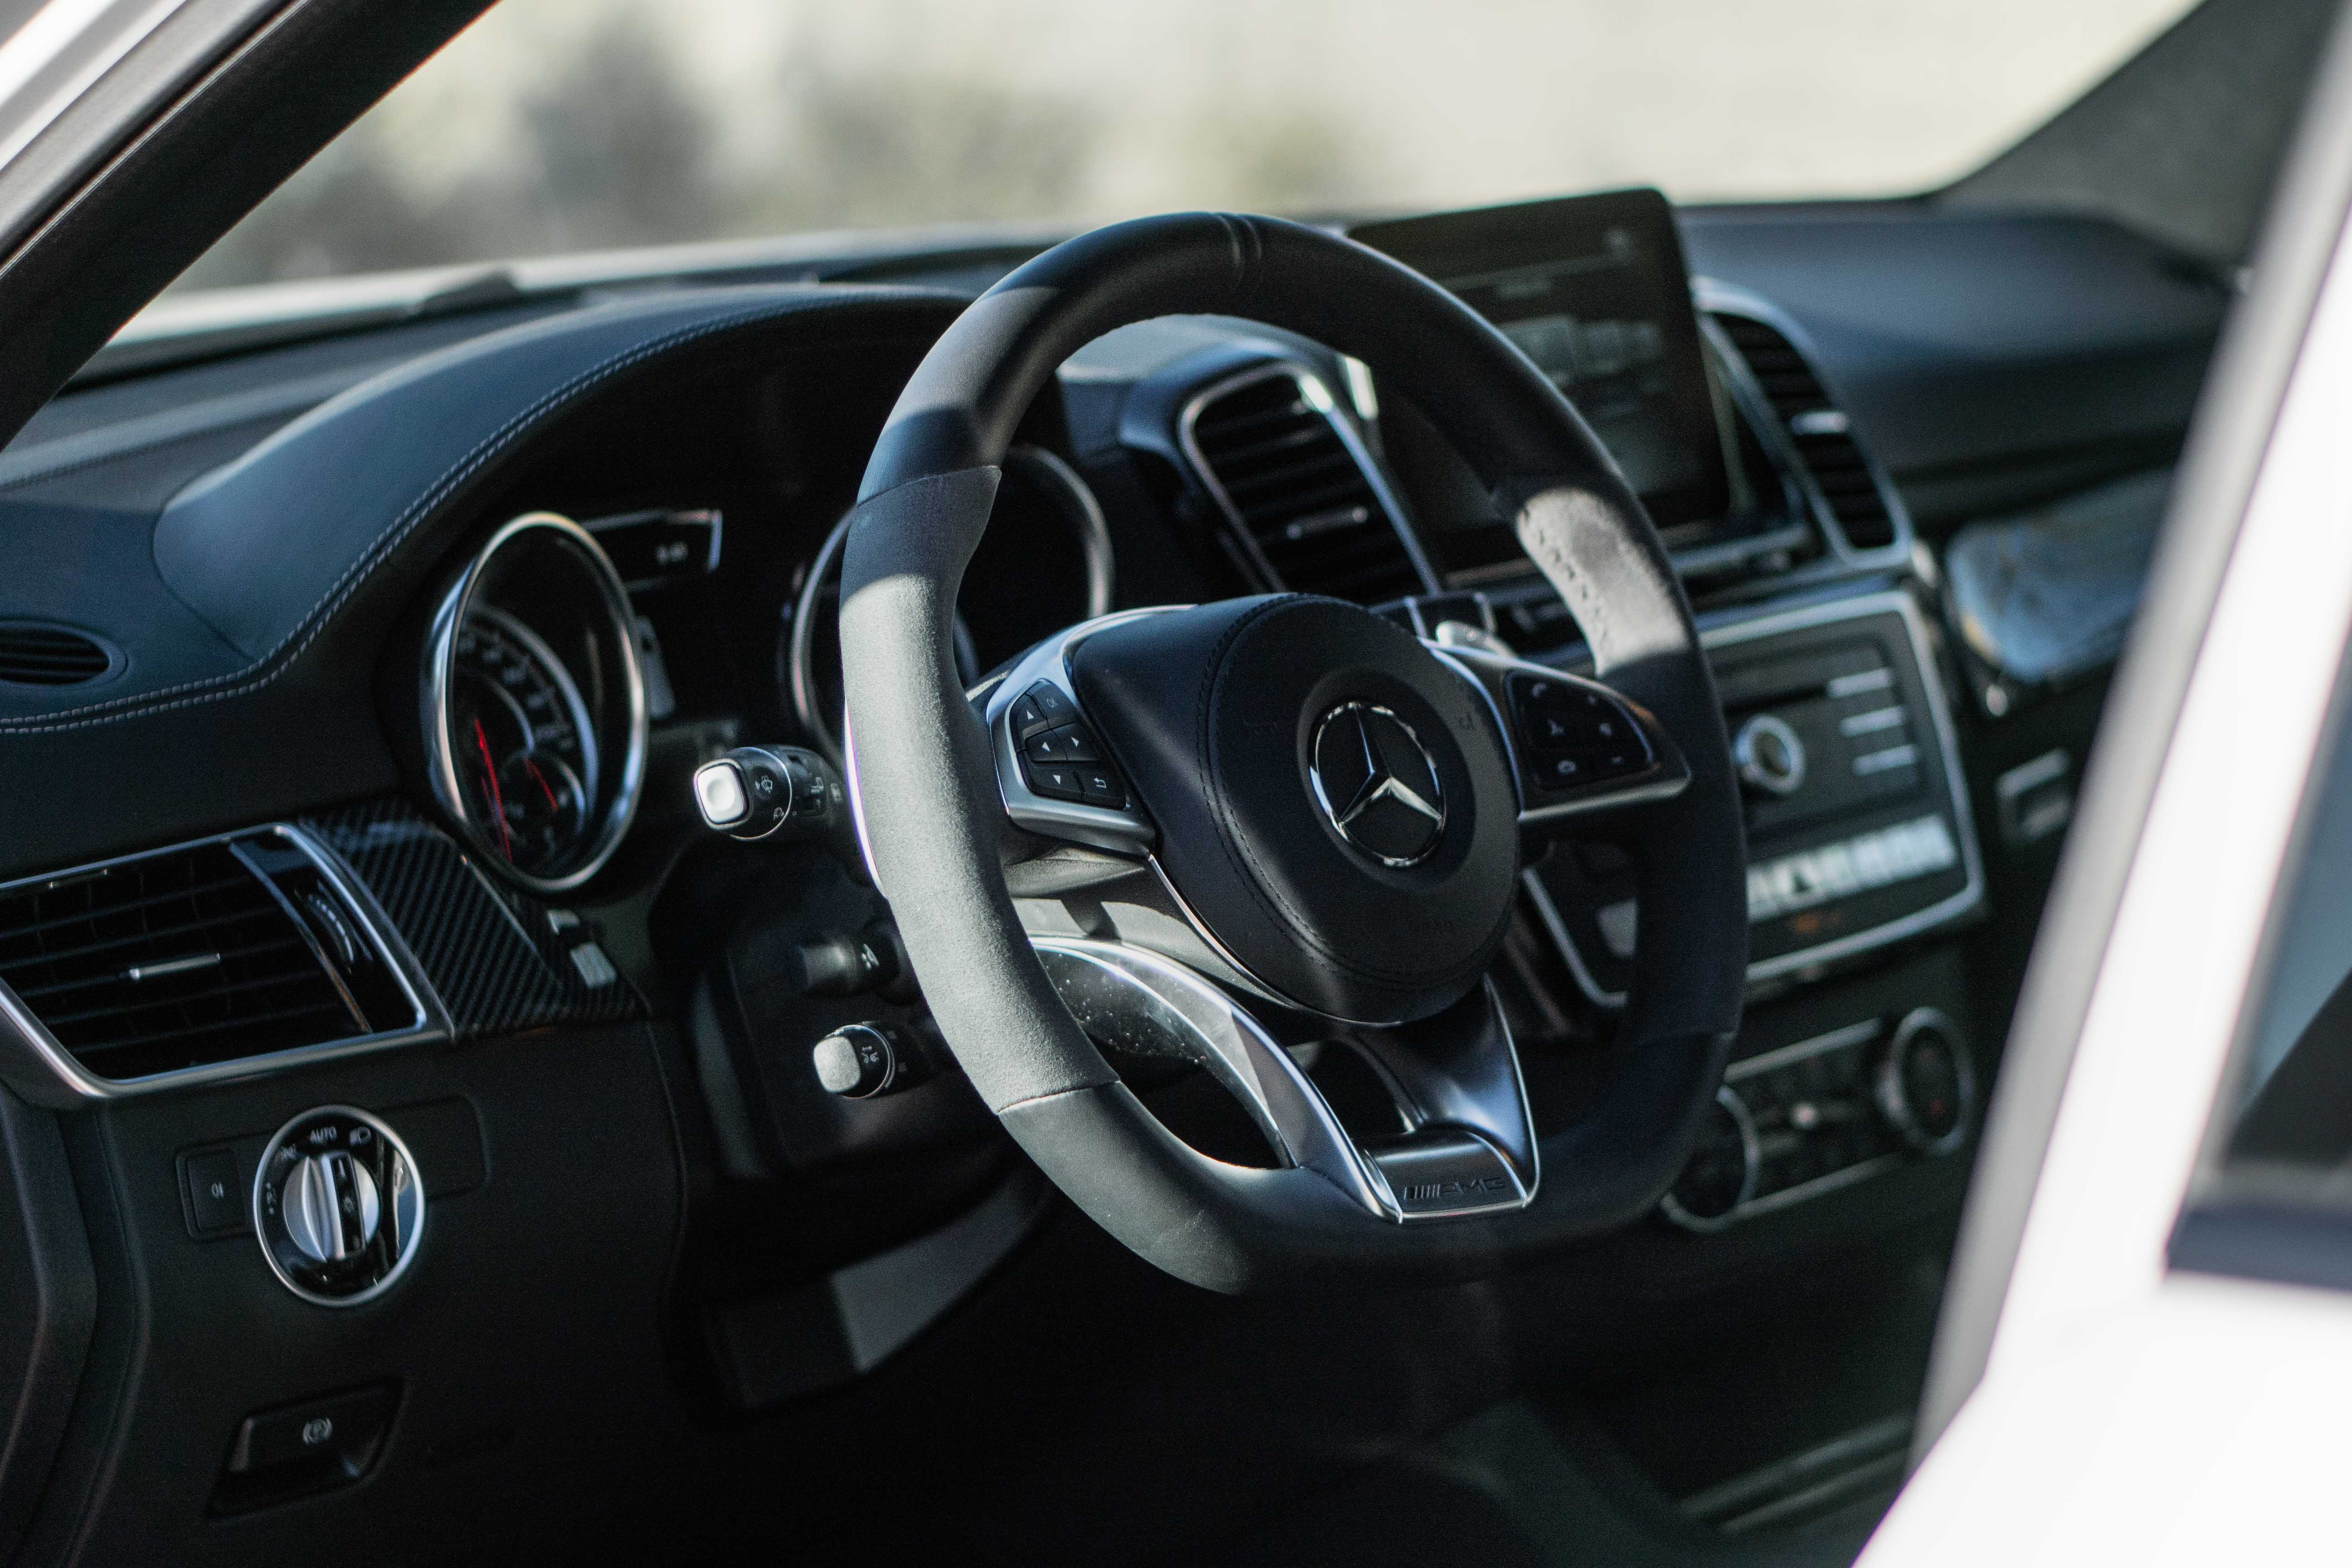 2019 Mercedes-Benz AMG GLS 63, 2019 Mercedes-Benz AMG GLS 63 is absurd in the best ways, ClassicCars.com Journal